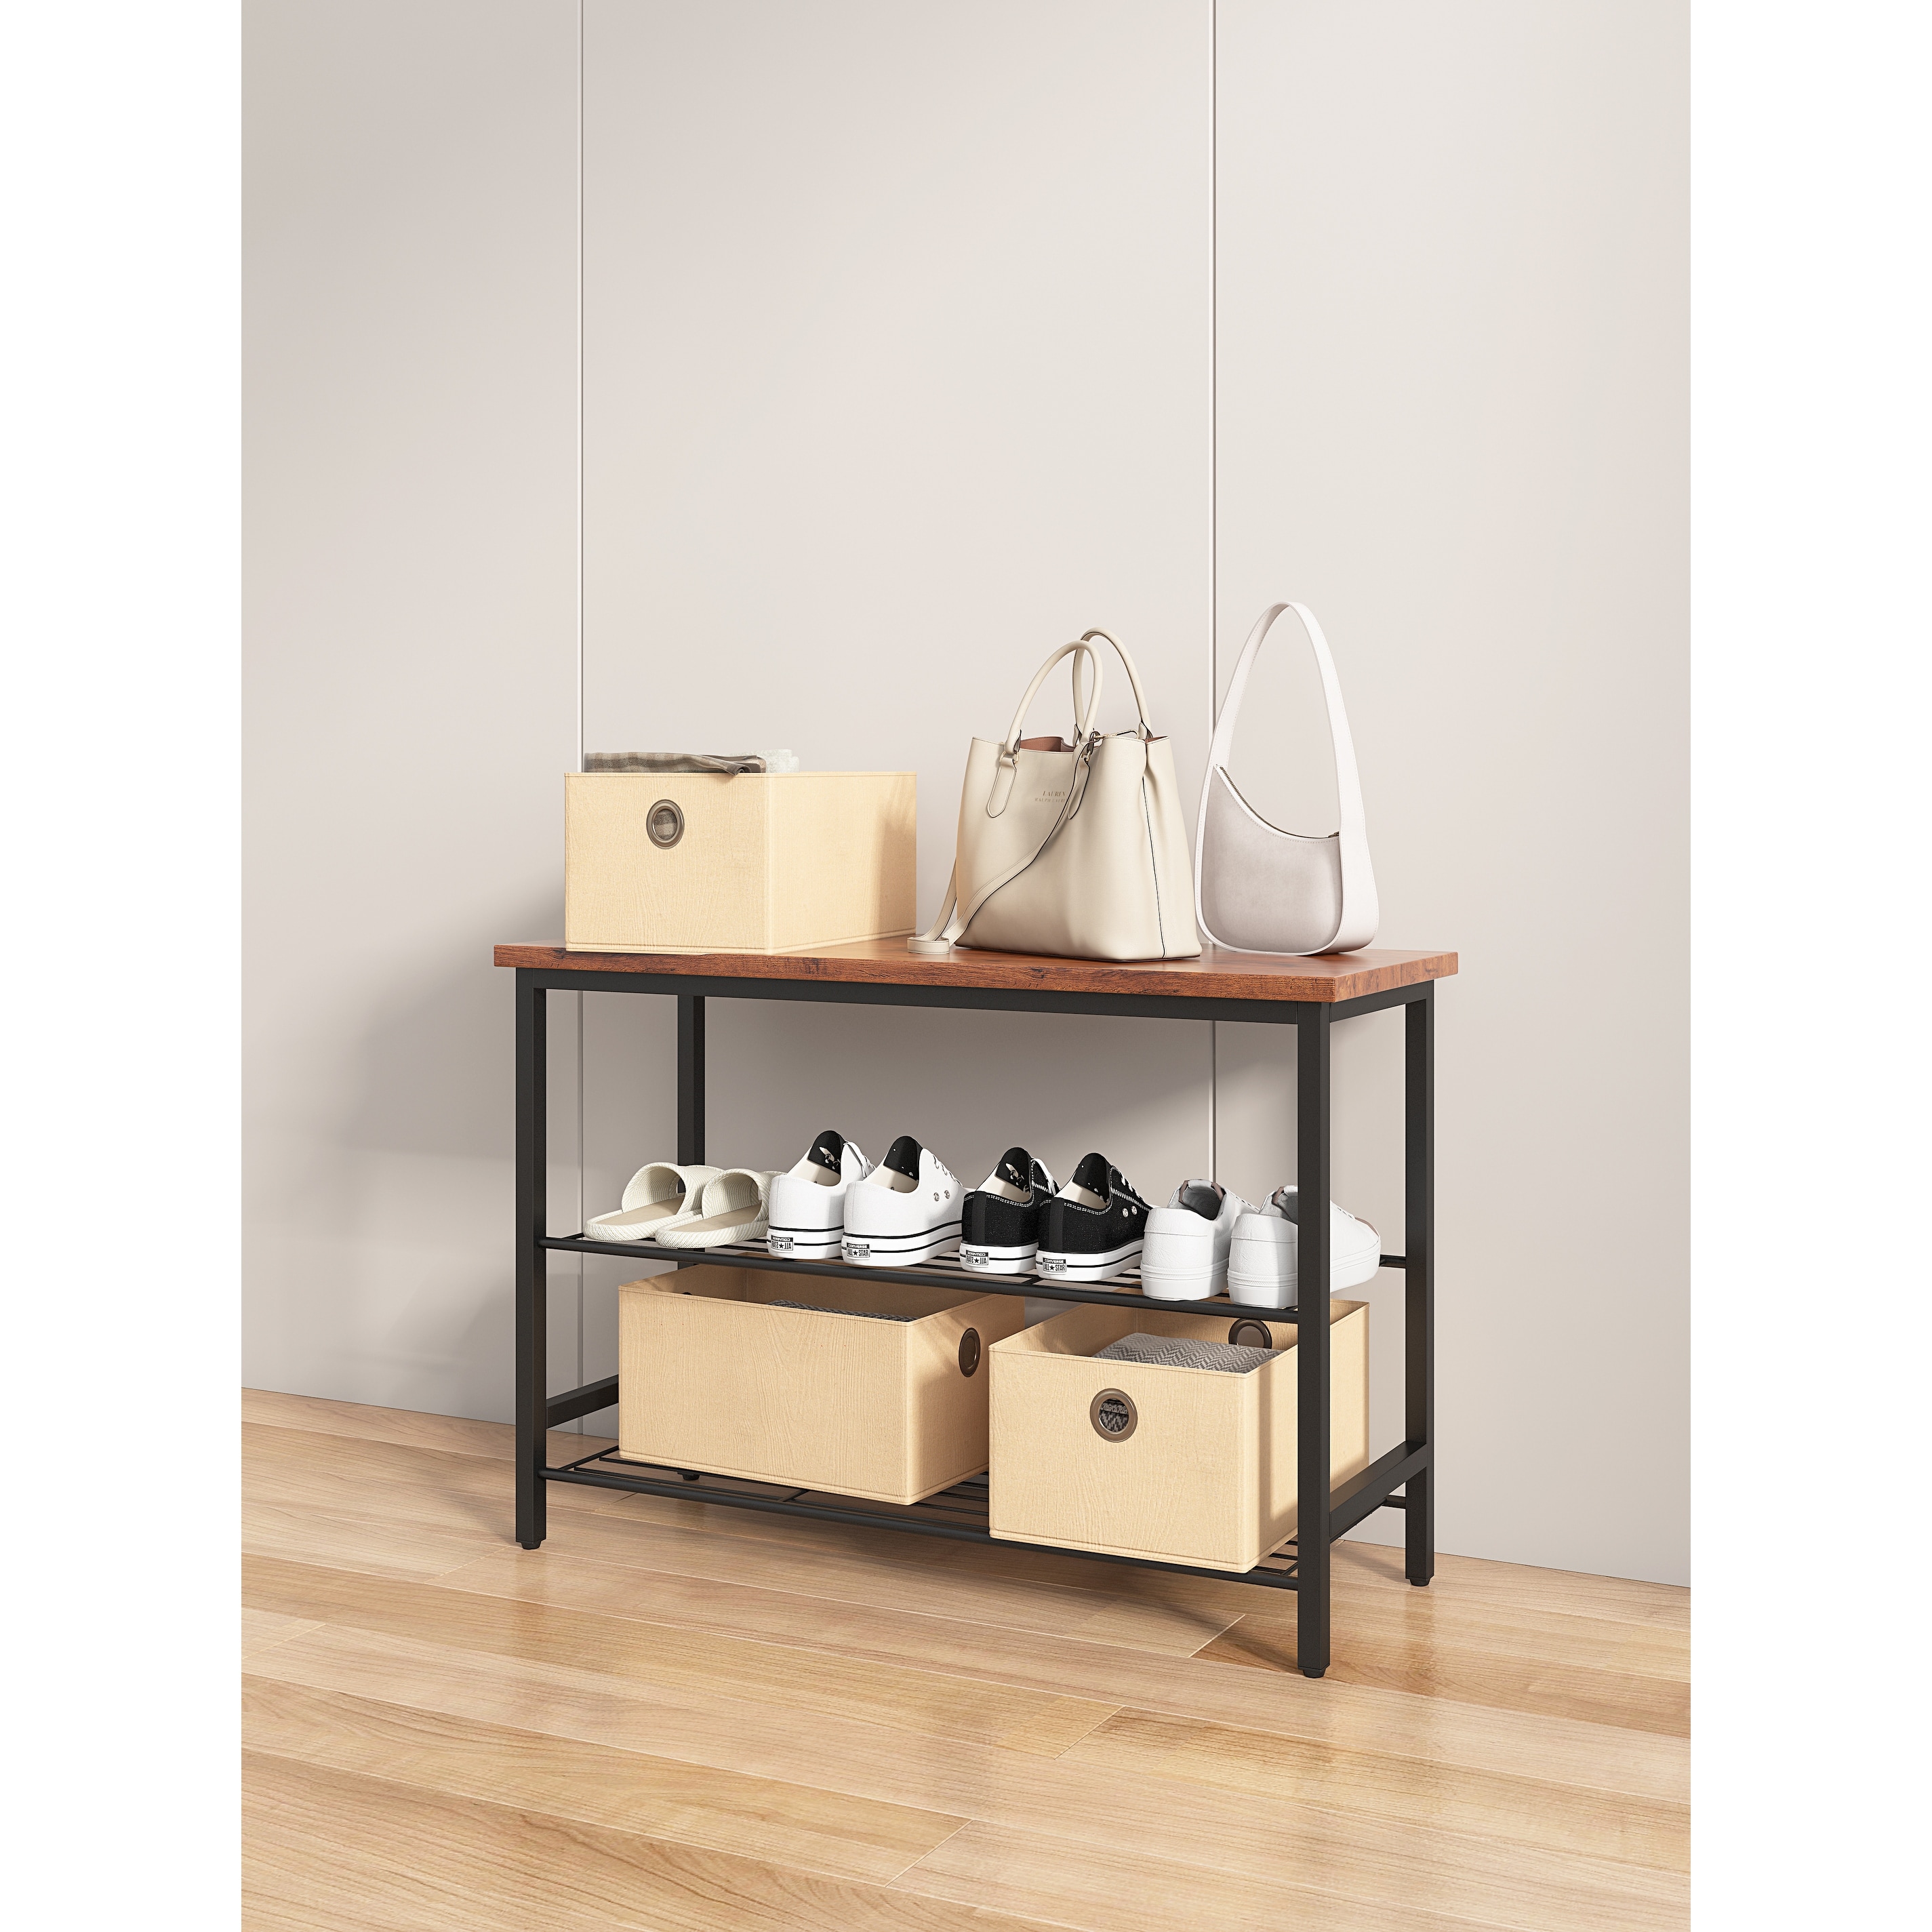 https://ak1.ostkcdn.com/images/products/is/images/direct/3d27a47124bfe6edda0004865d0f80b8596bf627/3-Tier-Metal-Shoe-Rack-Shoe-Storage-Shelf-and-MDF-Top-Board-Each-Tier-Fits-4-Pairs-Shoe-Storage-Organizer-for-Entryway.jpg